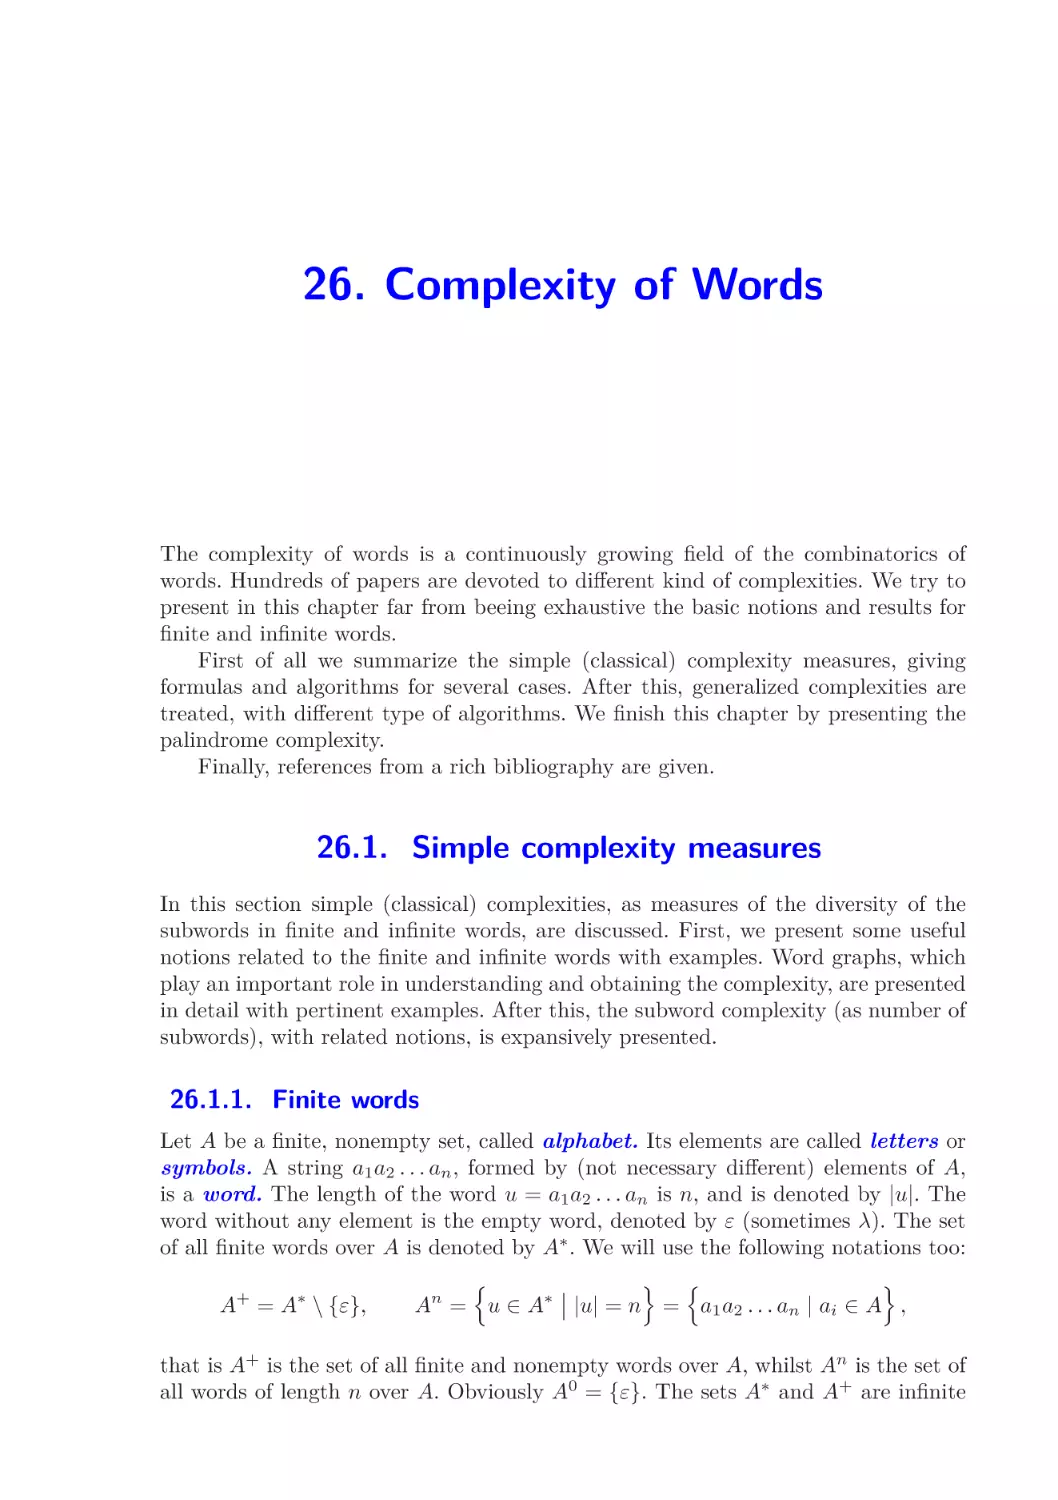 26. Complexity of Words
26.1.  Simple complexity measures
26.1.1.  Finite words